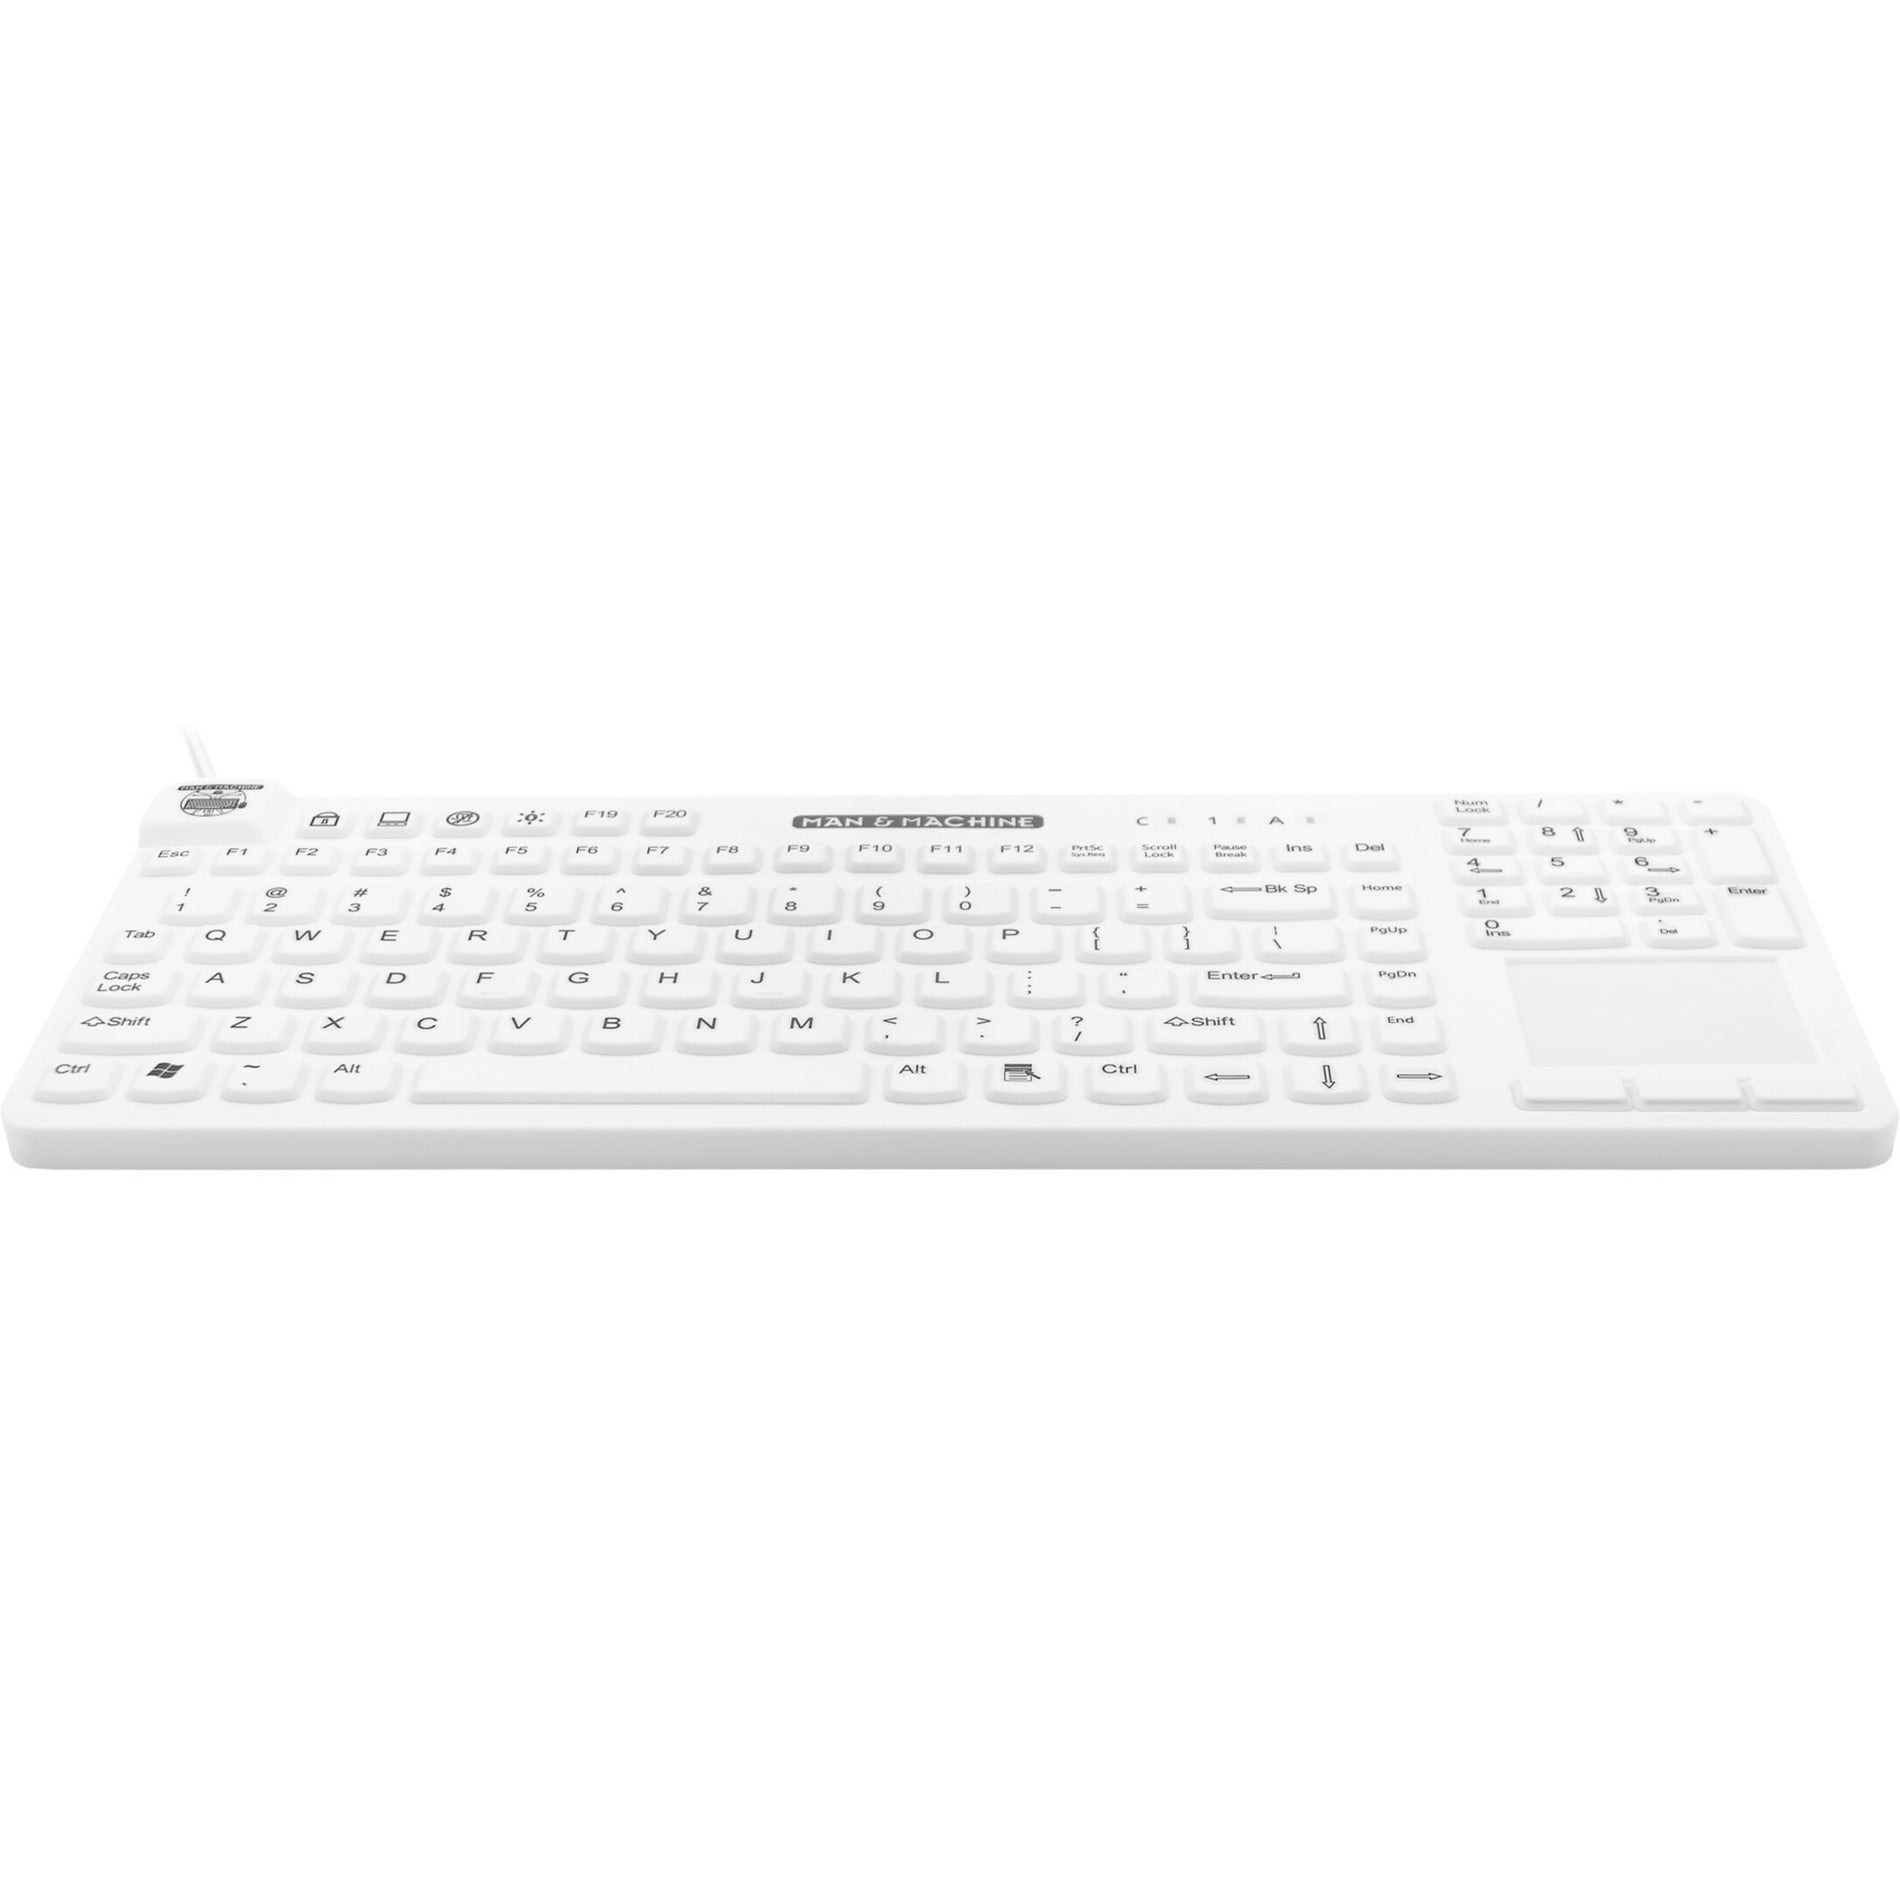 Man & Machine RCTLP/W5 Really Cool Touch Keyboard, Industrial Silicon Rubber, USB Cable, White